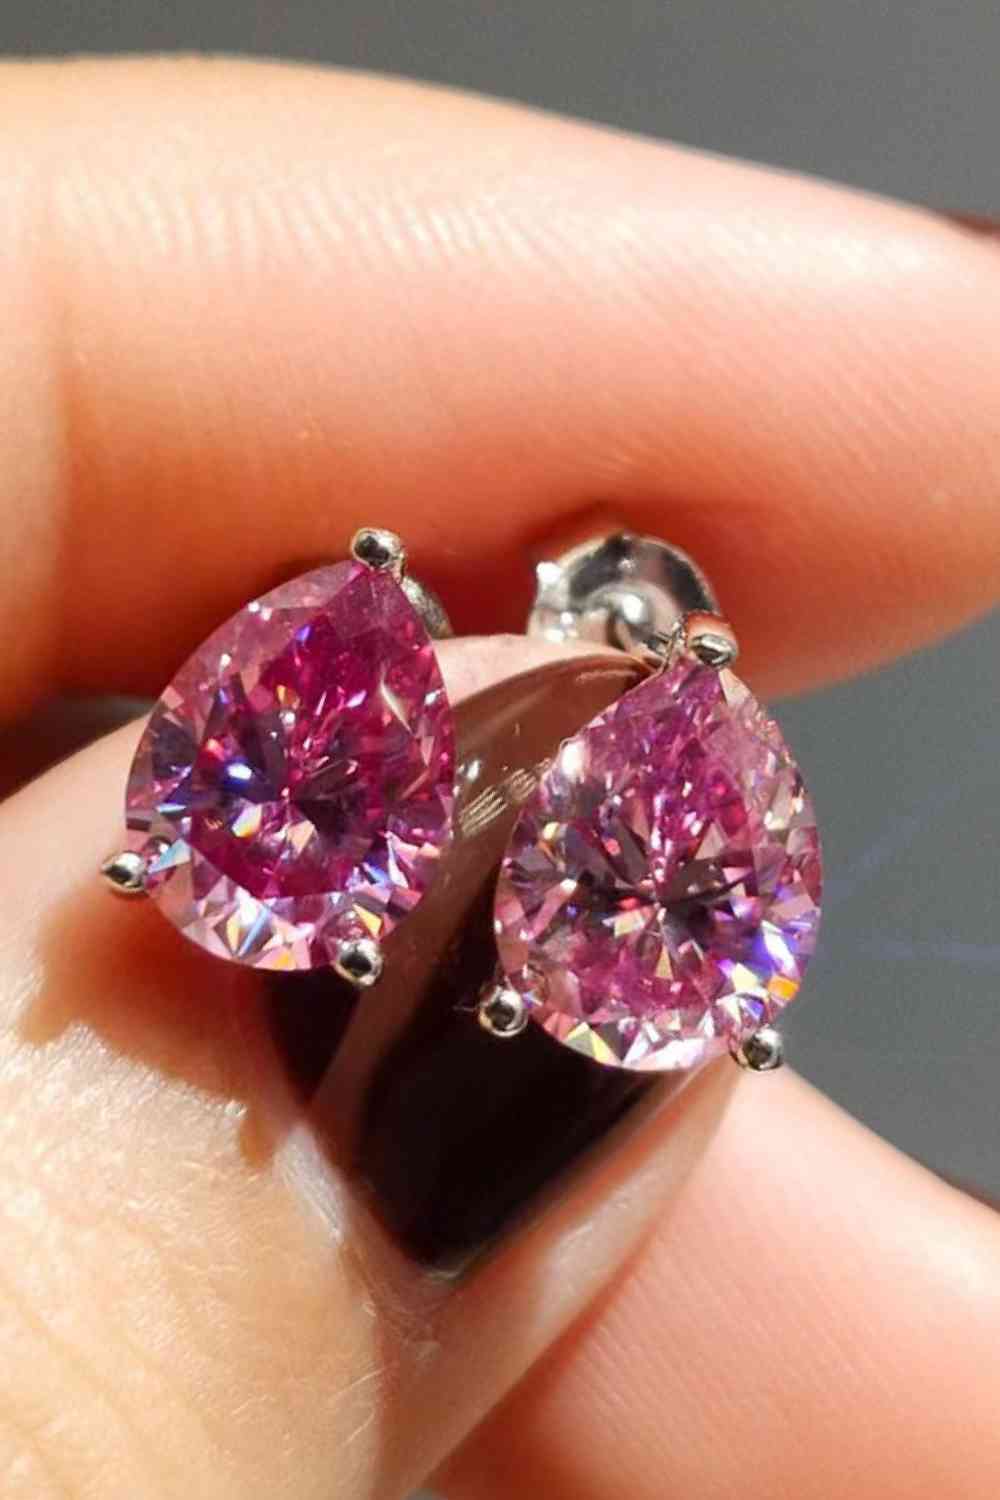 a pair of pink diamond earrings on a person's finger